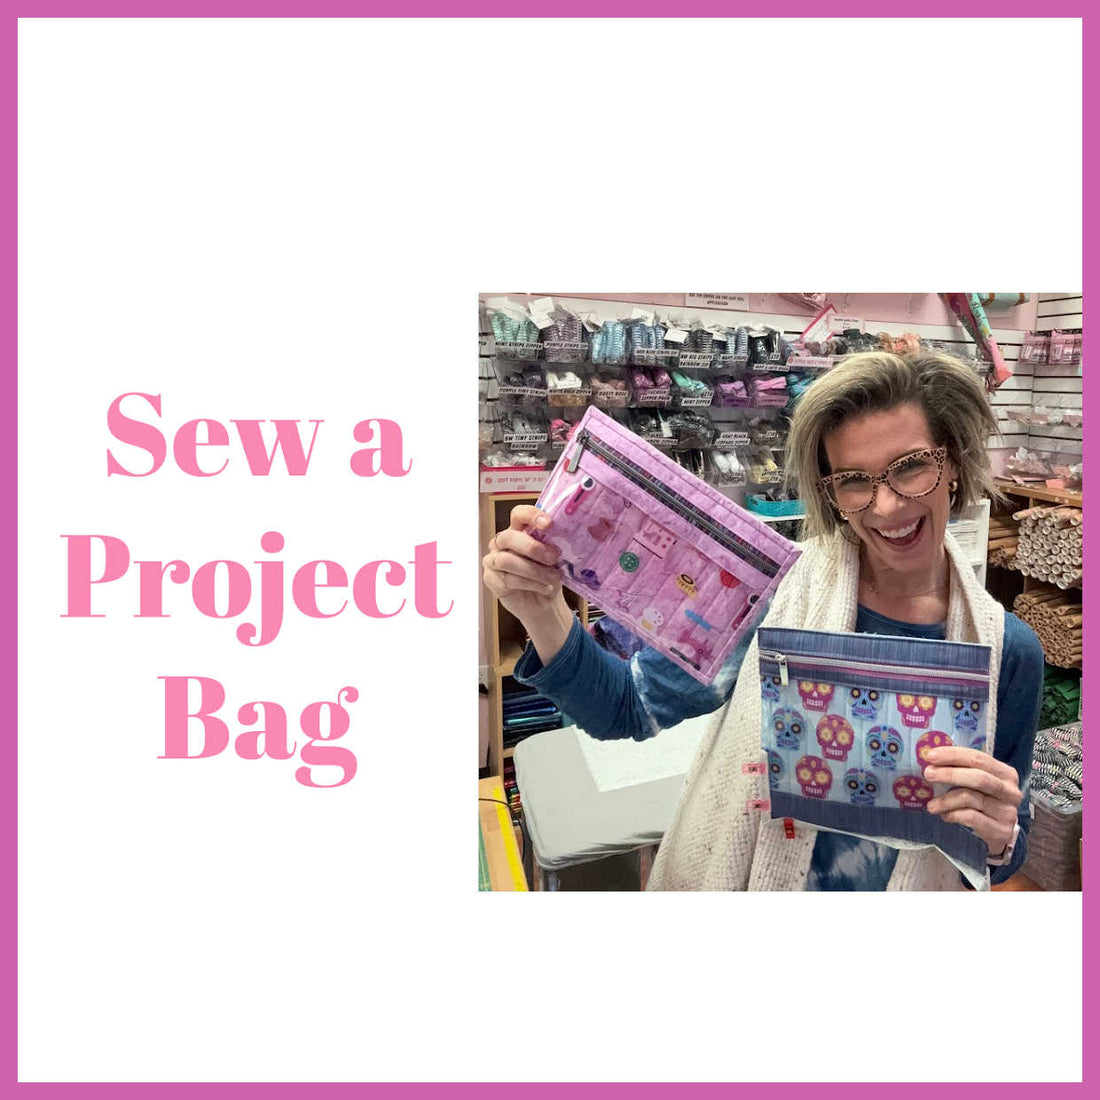 Project bag Tutorial - let's wing it!